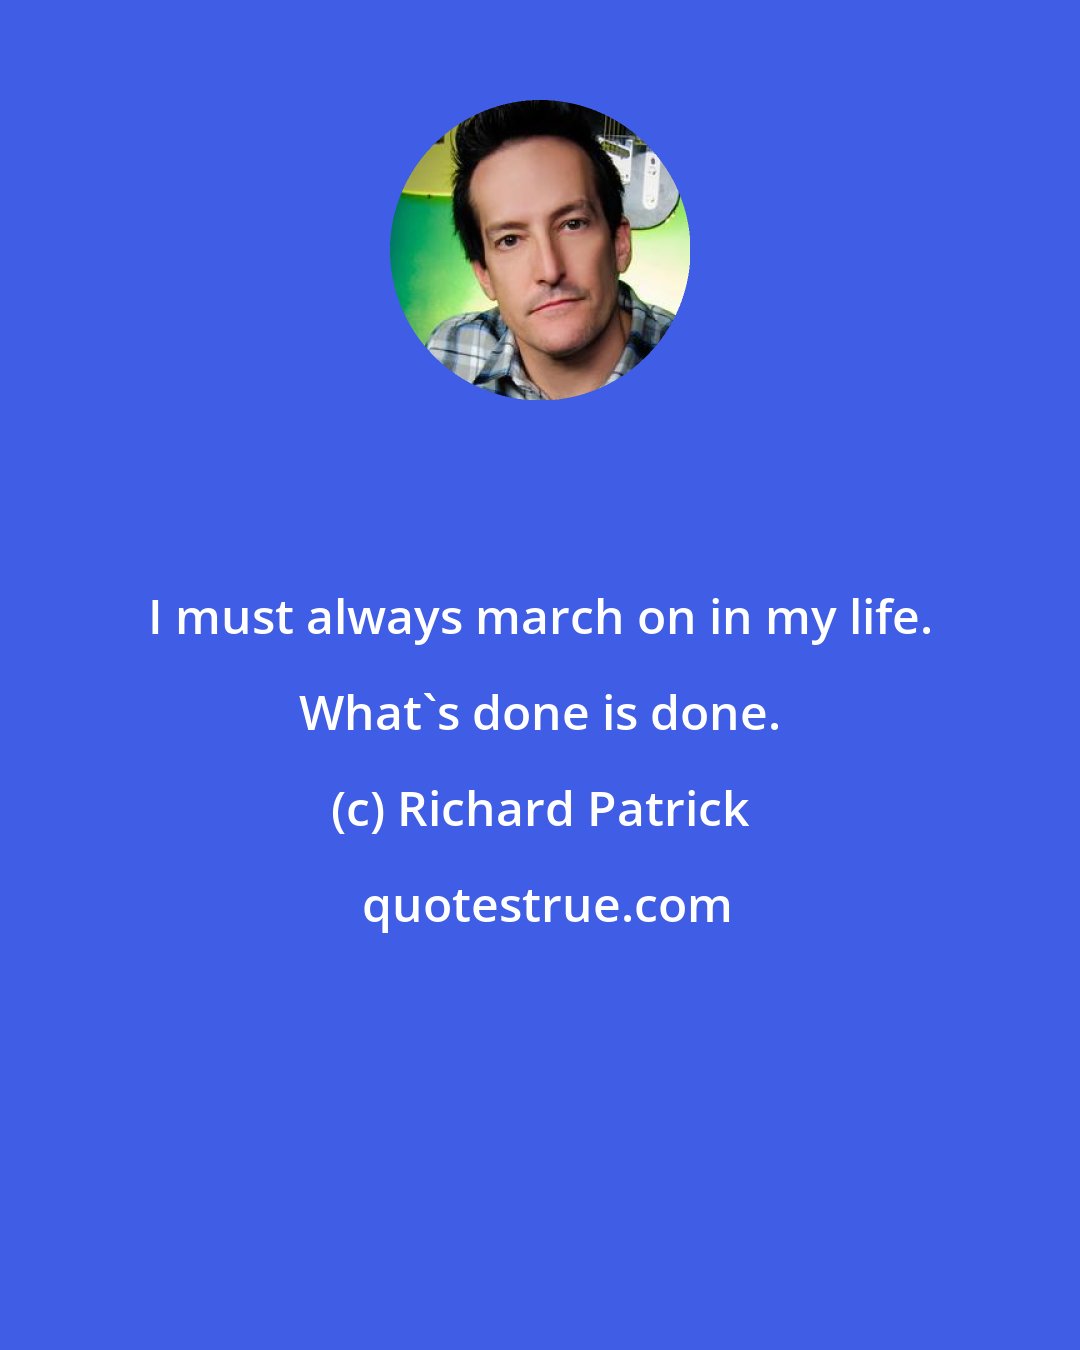 Richard Patrick: I must always march on in my life. What's done is done.